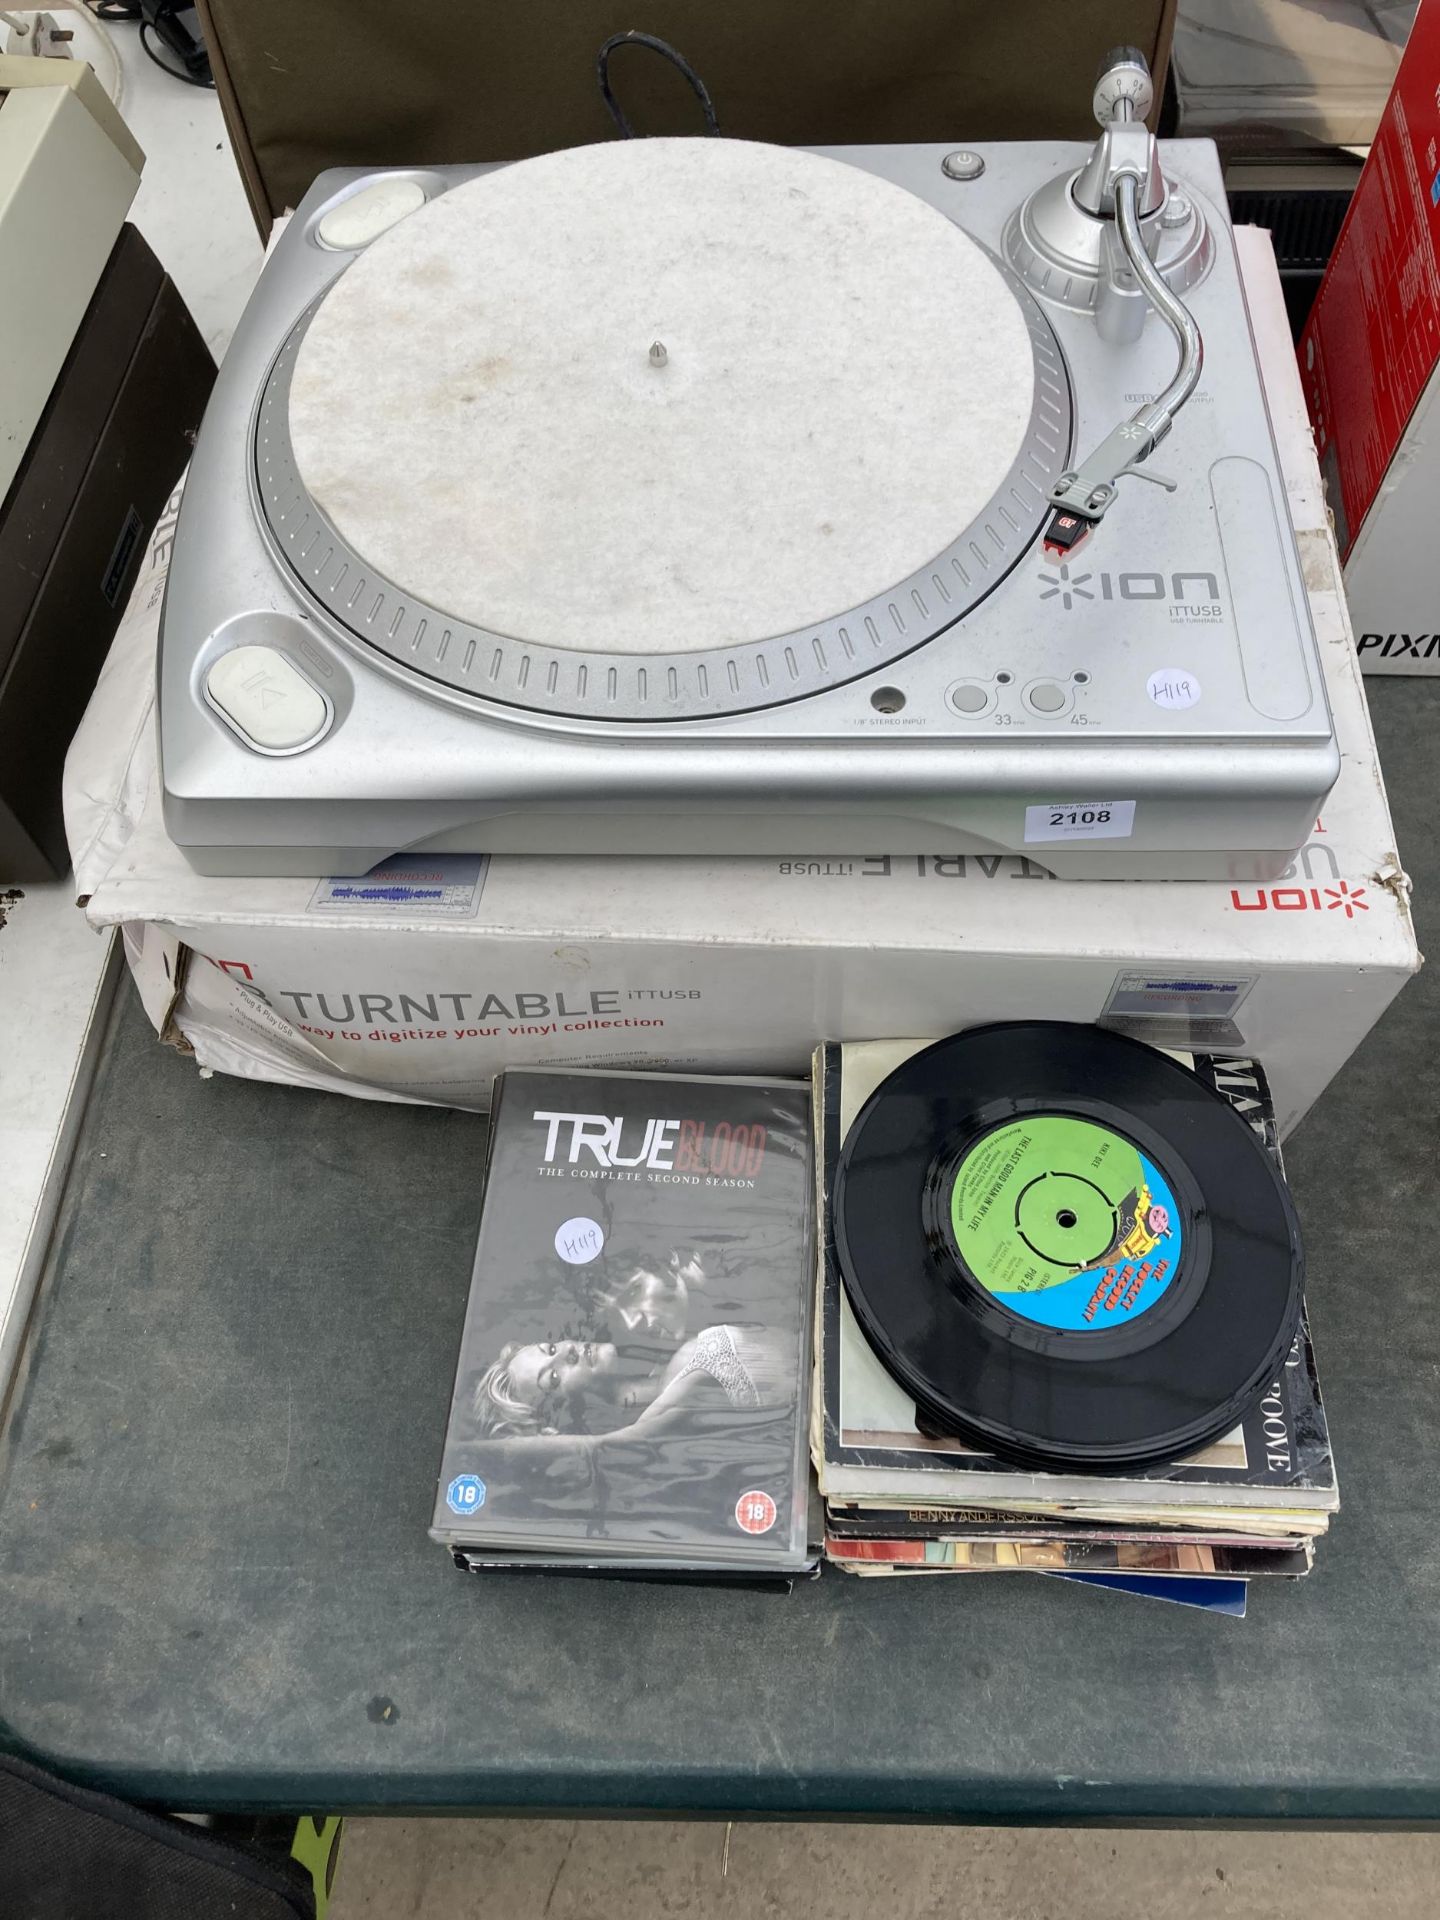 AN ION USB TURNTABLE AND AN ASSORTMENT OF 7" SINGLES